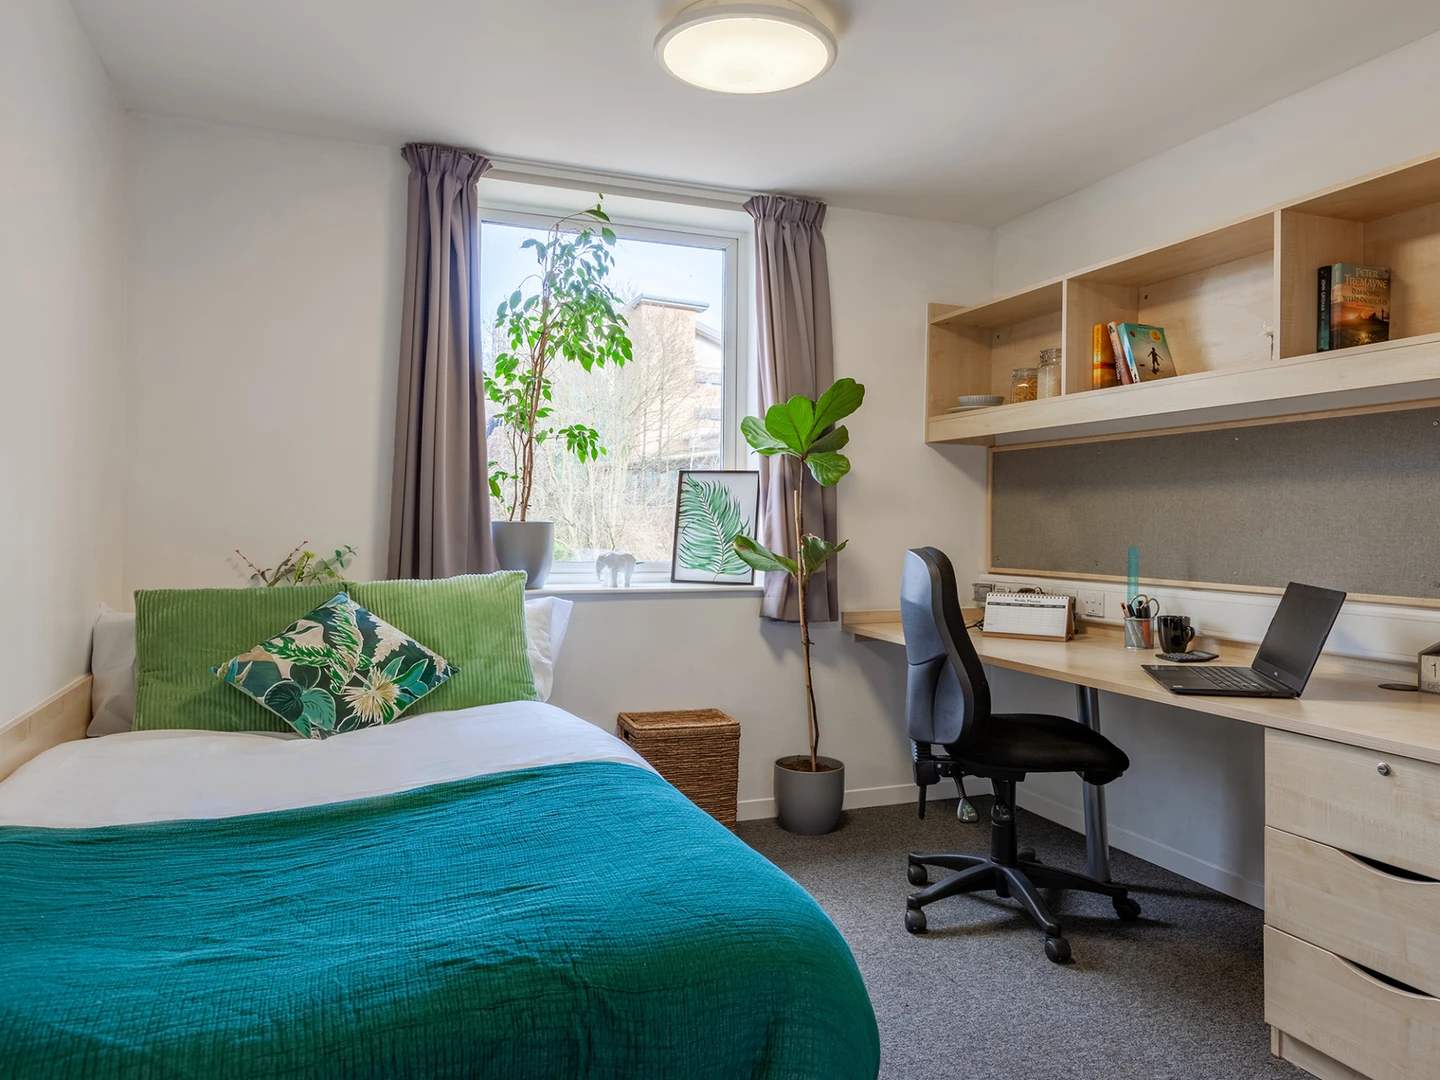 Renting rooms by the month in Bradford